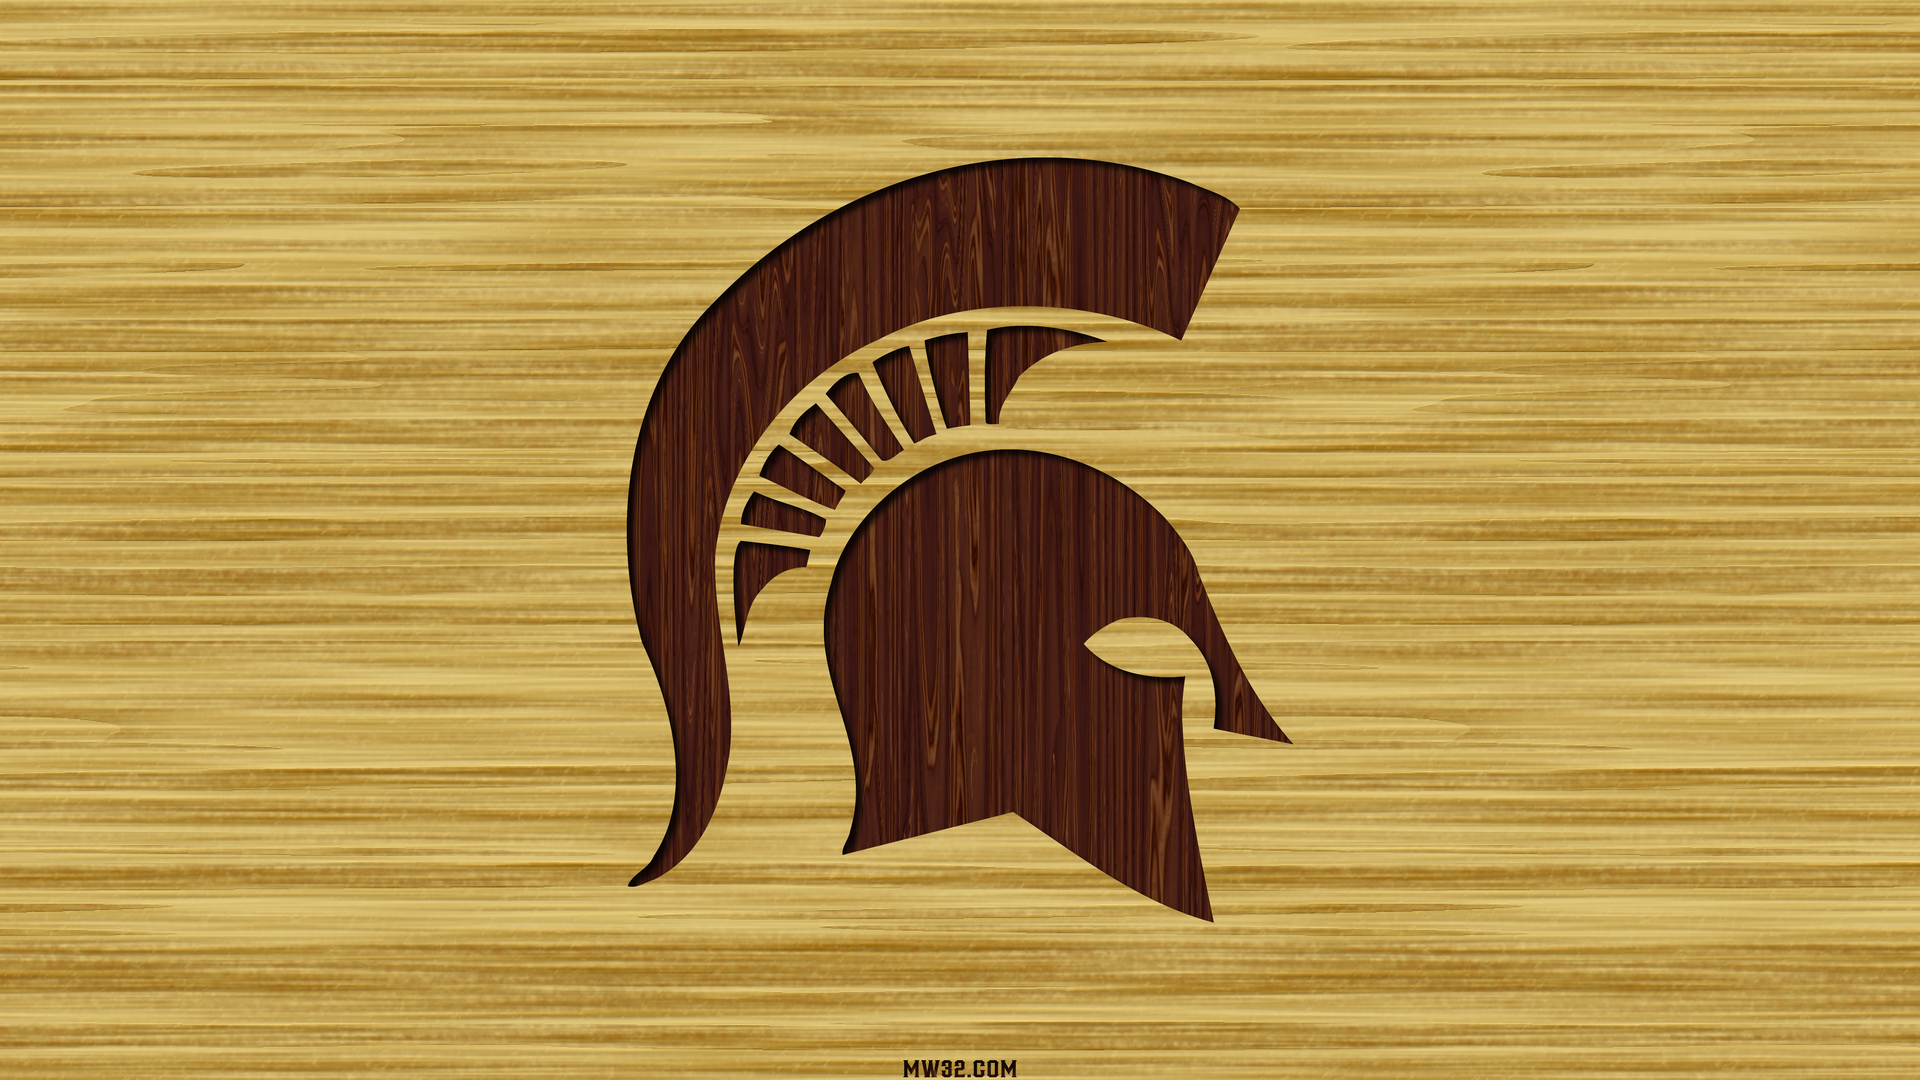 Michigan State Basketball Court Wallpaper Images Pictures   Becuo 1920x1080